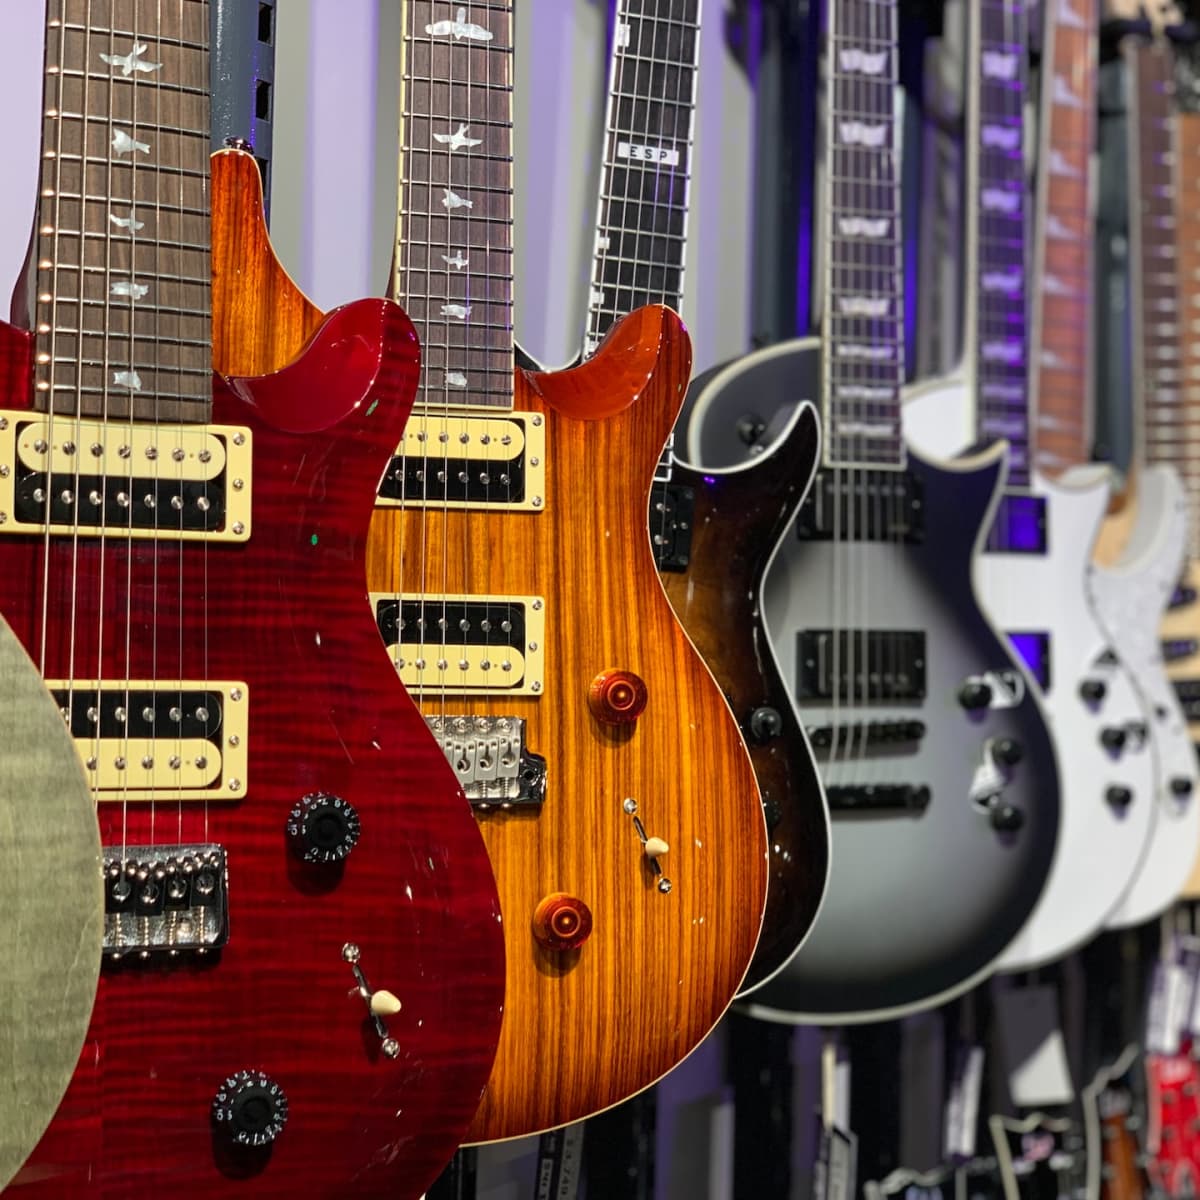 These 5 Have Been The Best Electric Guitars for My Small Hands